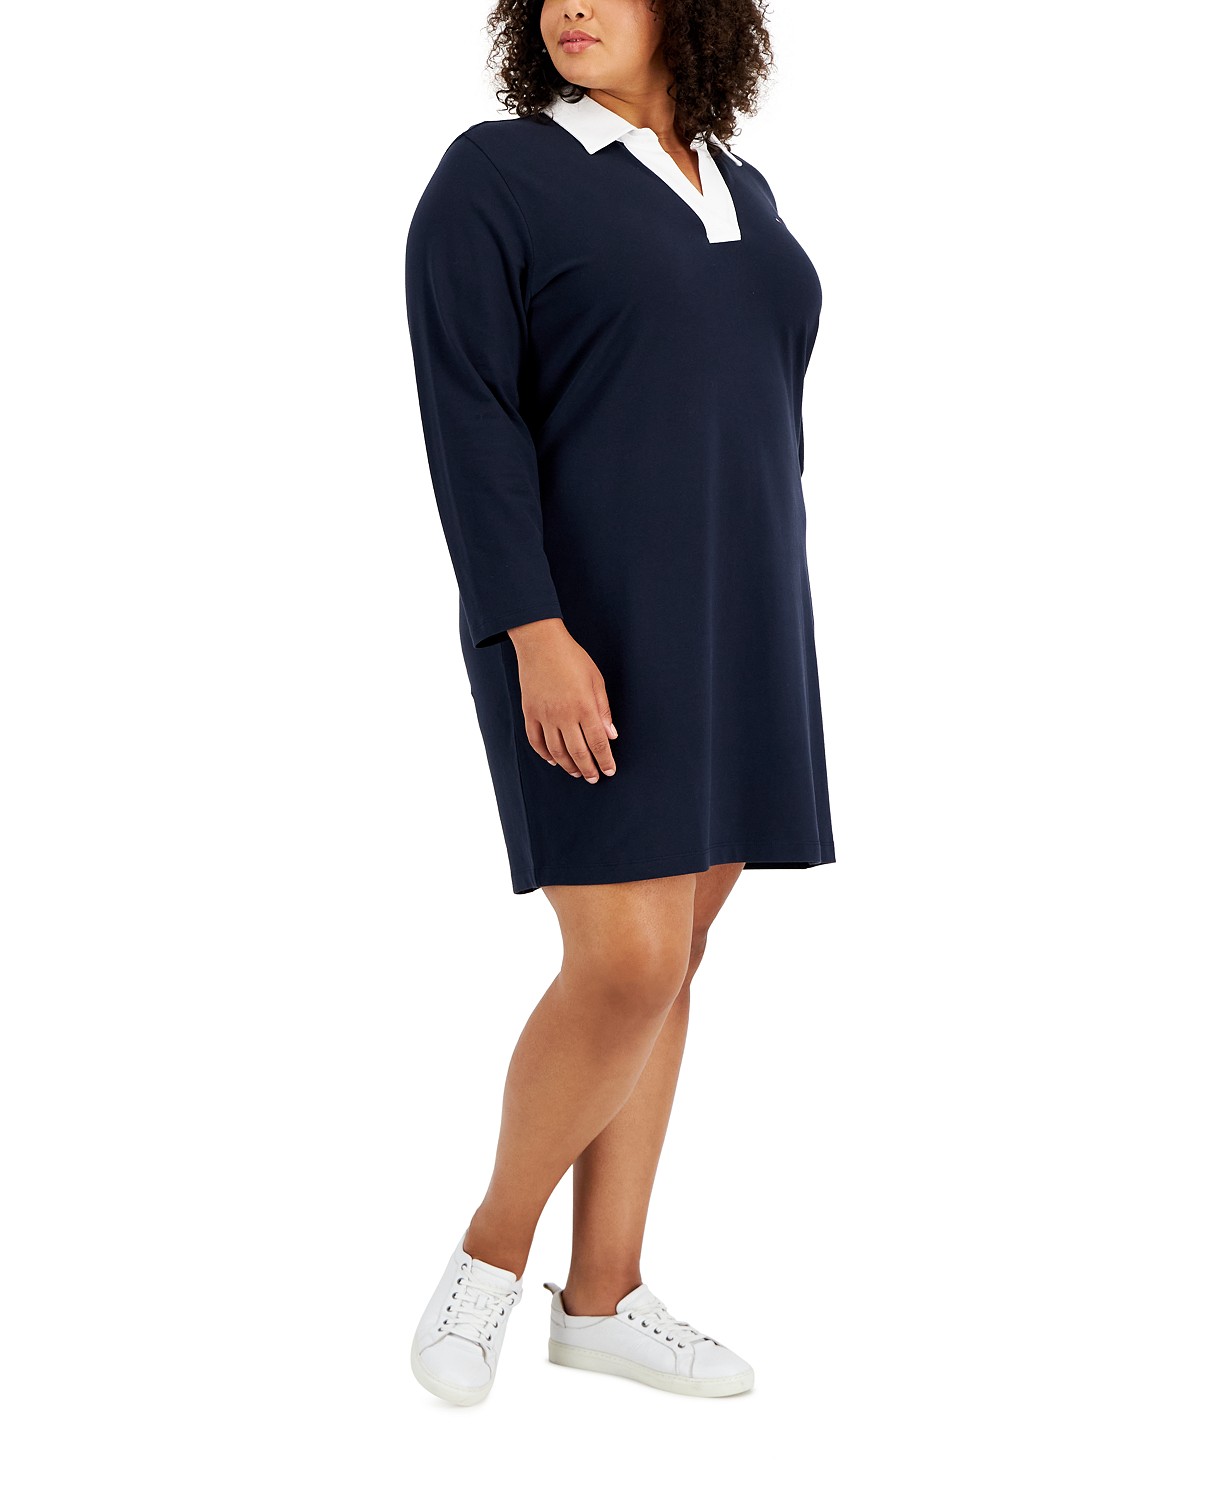 Plus Size Johnny-Collar Rugby Dress